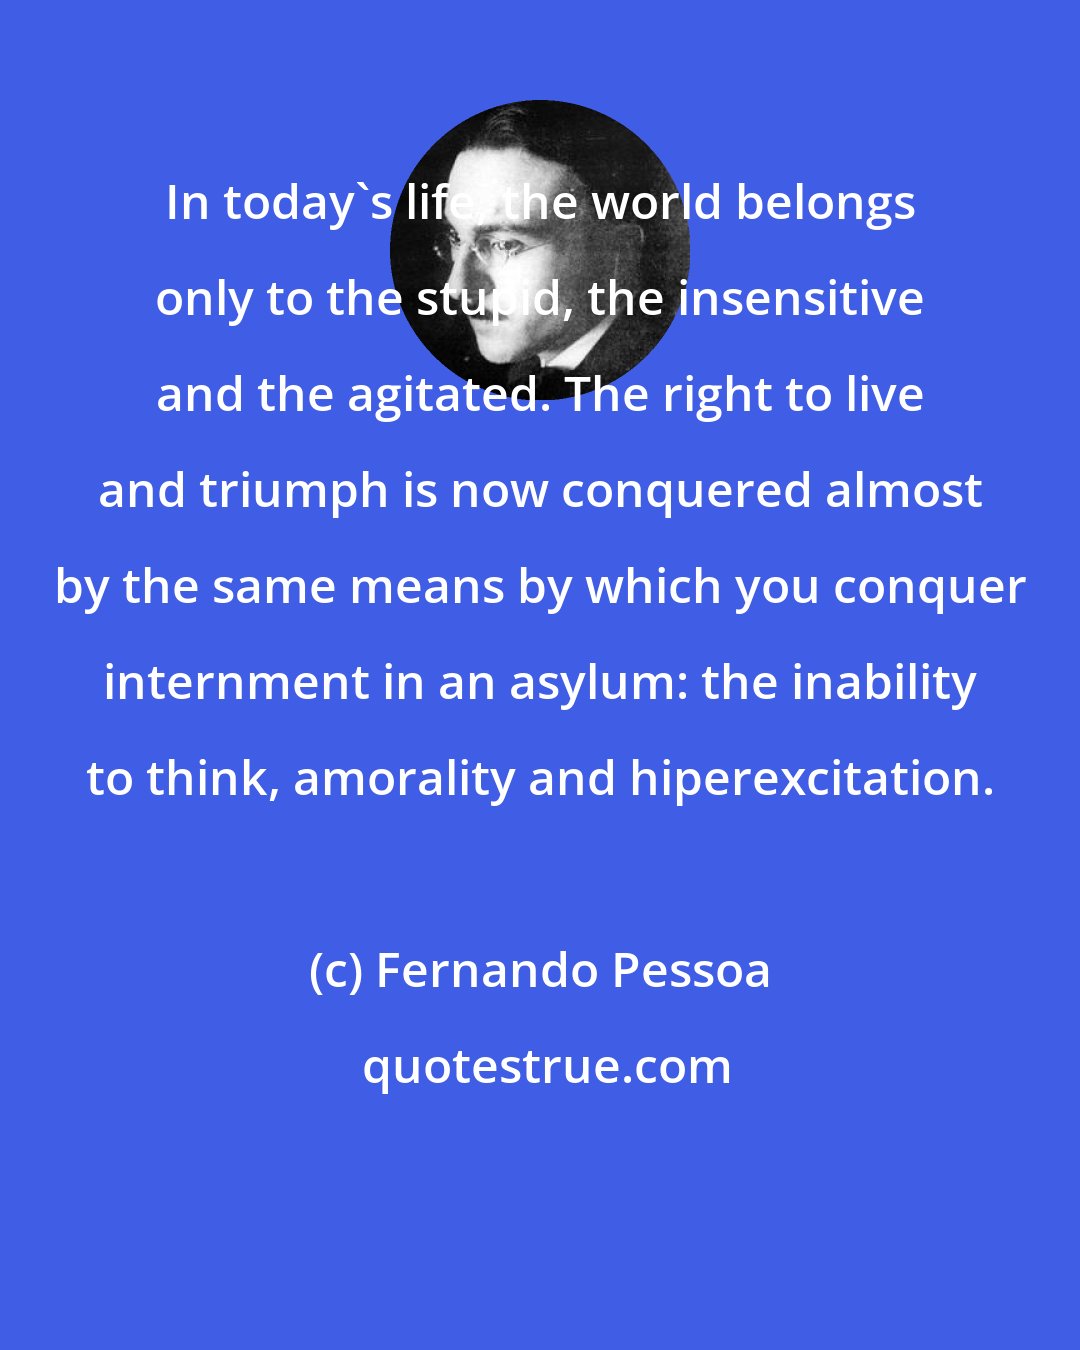 Fernando Pessoa: In today's life, the world belongs only to the stupid, the insensitive and the agitated. The right to live and triumph is now conquered almost by the same means by which you conquer internment in an asylum: the inability to think, amorality and hiperexcitation.